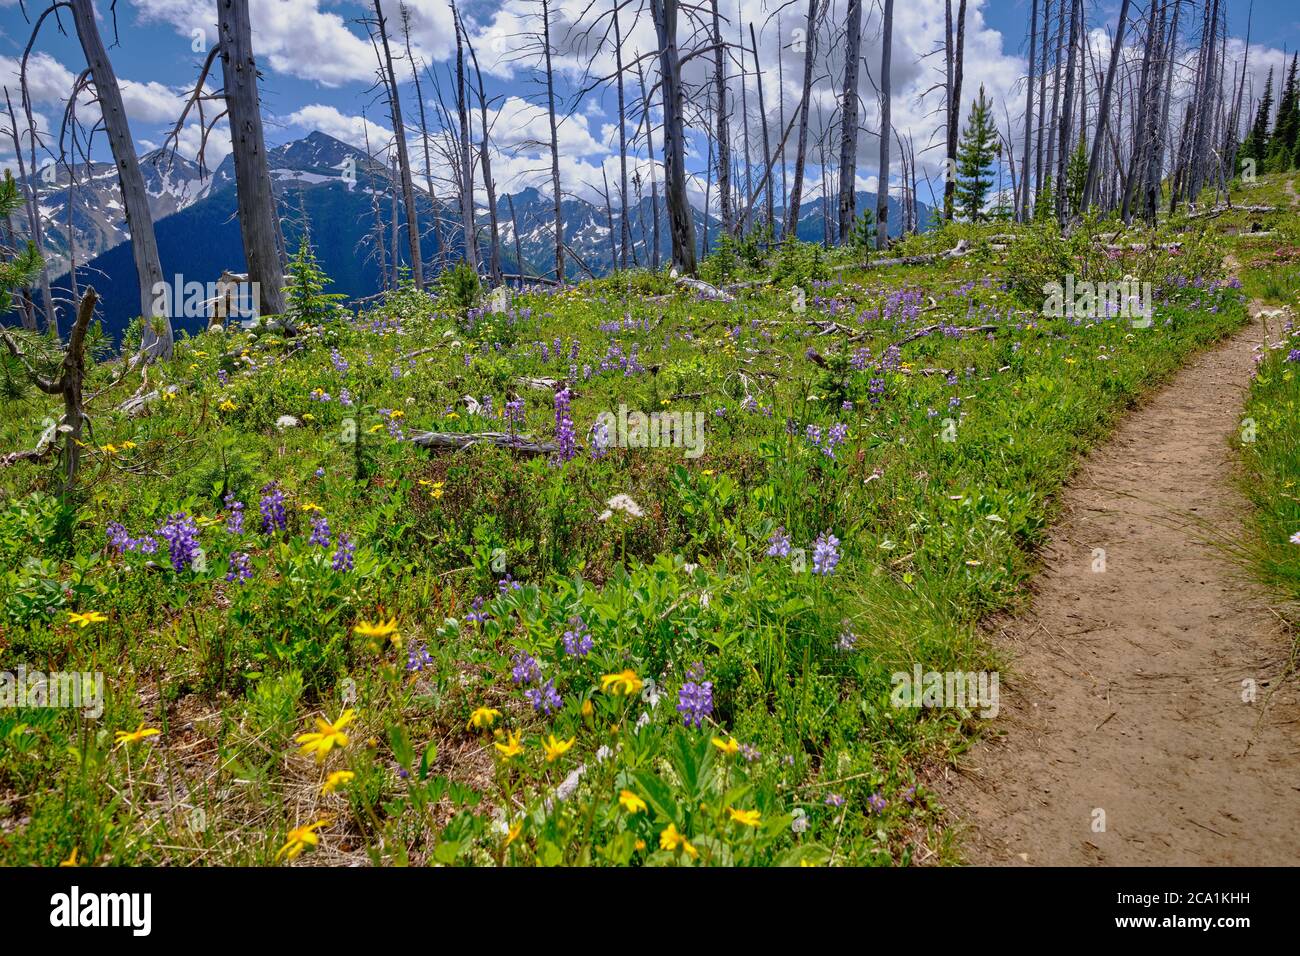 Skyline Trail in Manning Park, BC, Canada leads through flowering alpine meadows along a ridge with views to Frosty Mountain Stock Photo